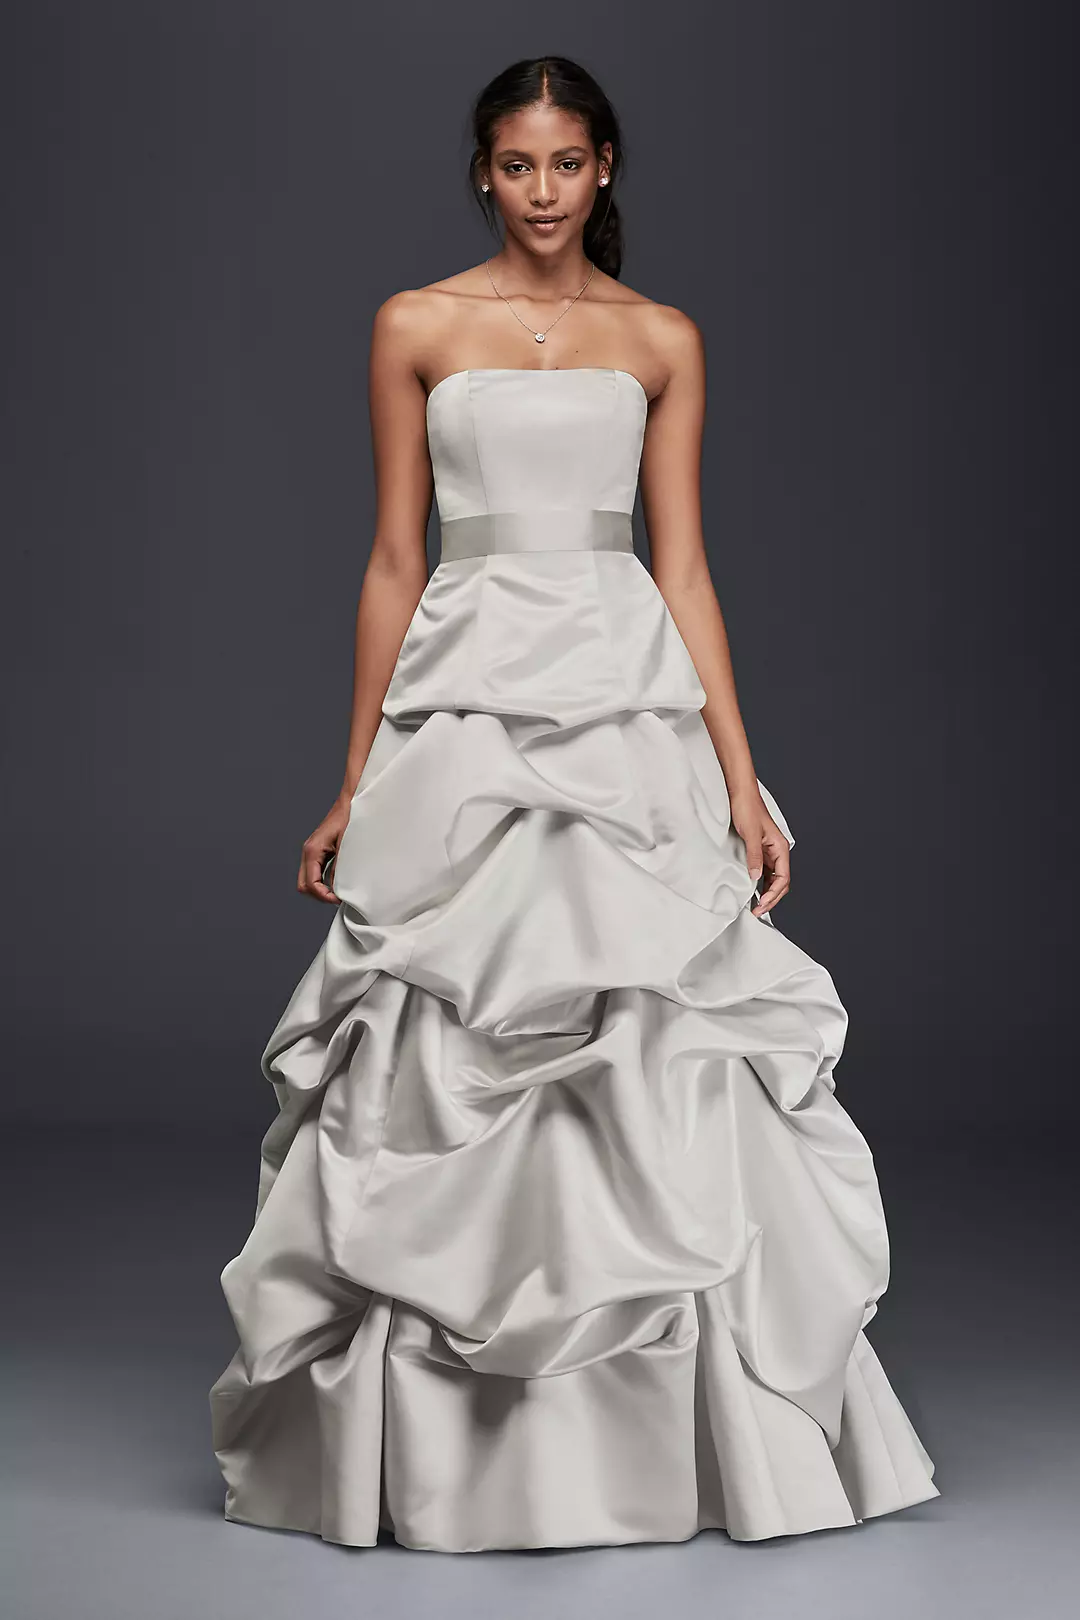 Strapless Drop-Waist Ball Gown with Skirt Pickups Image